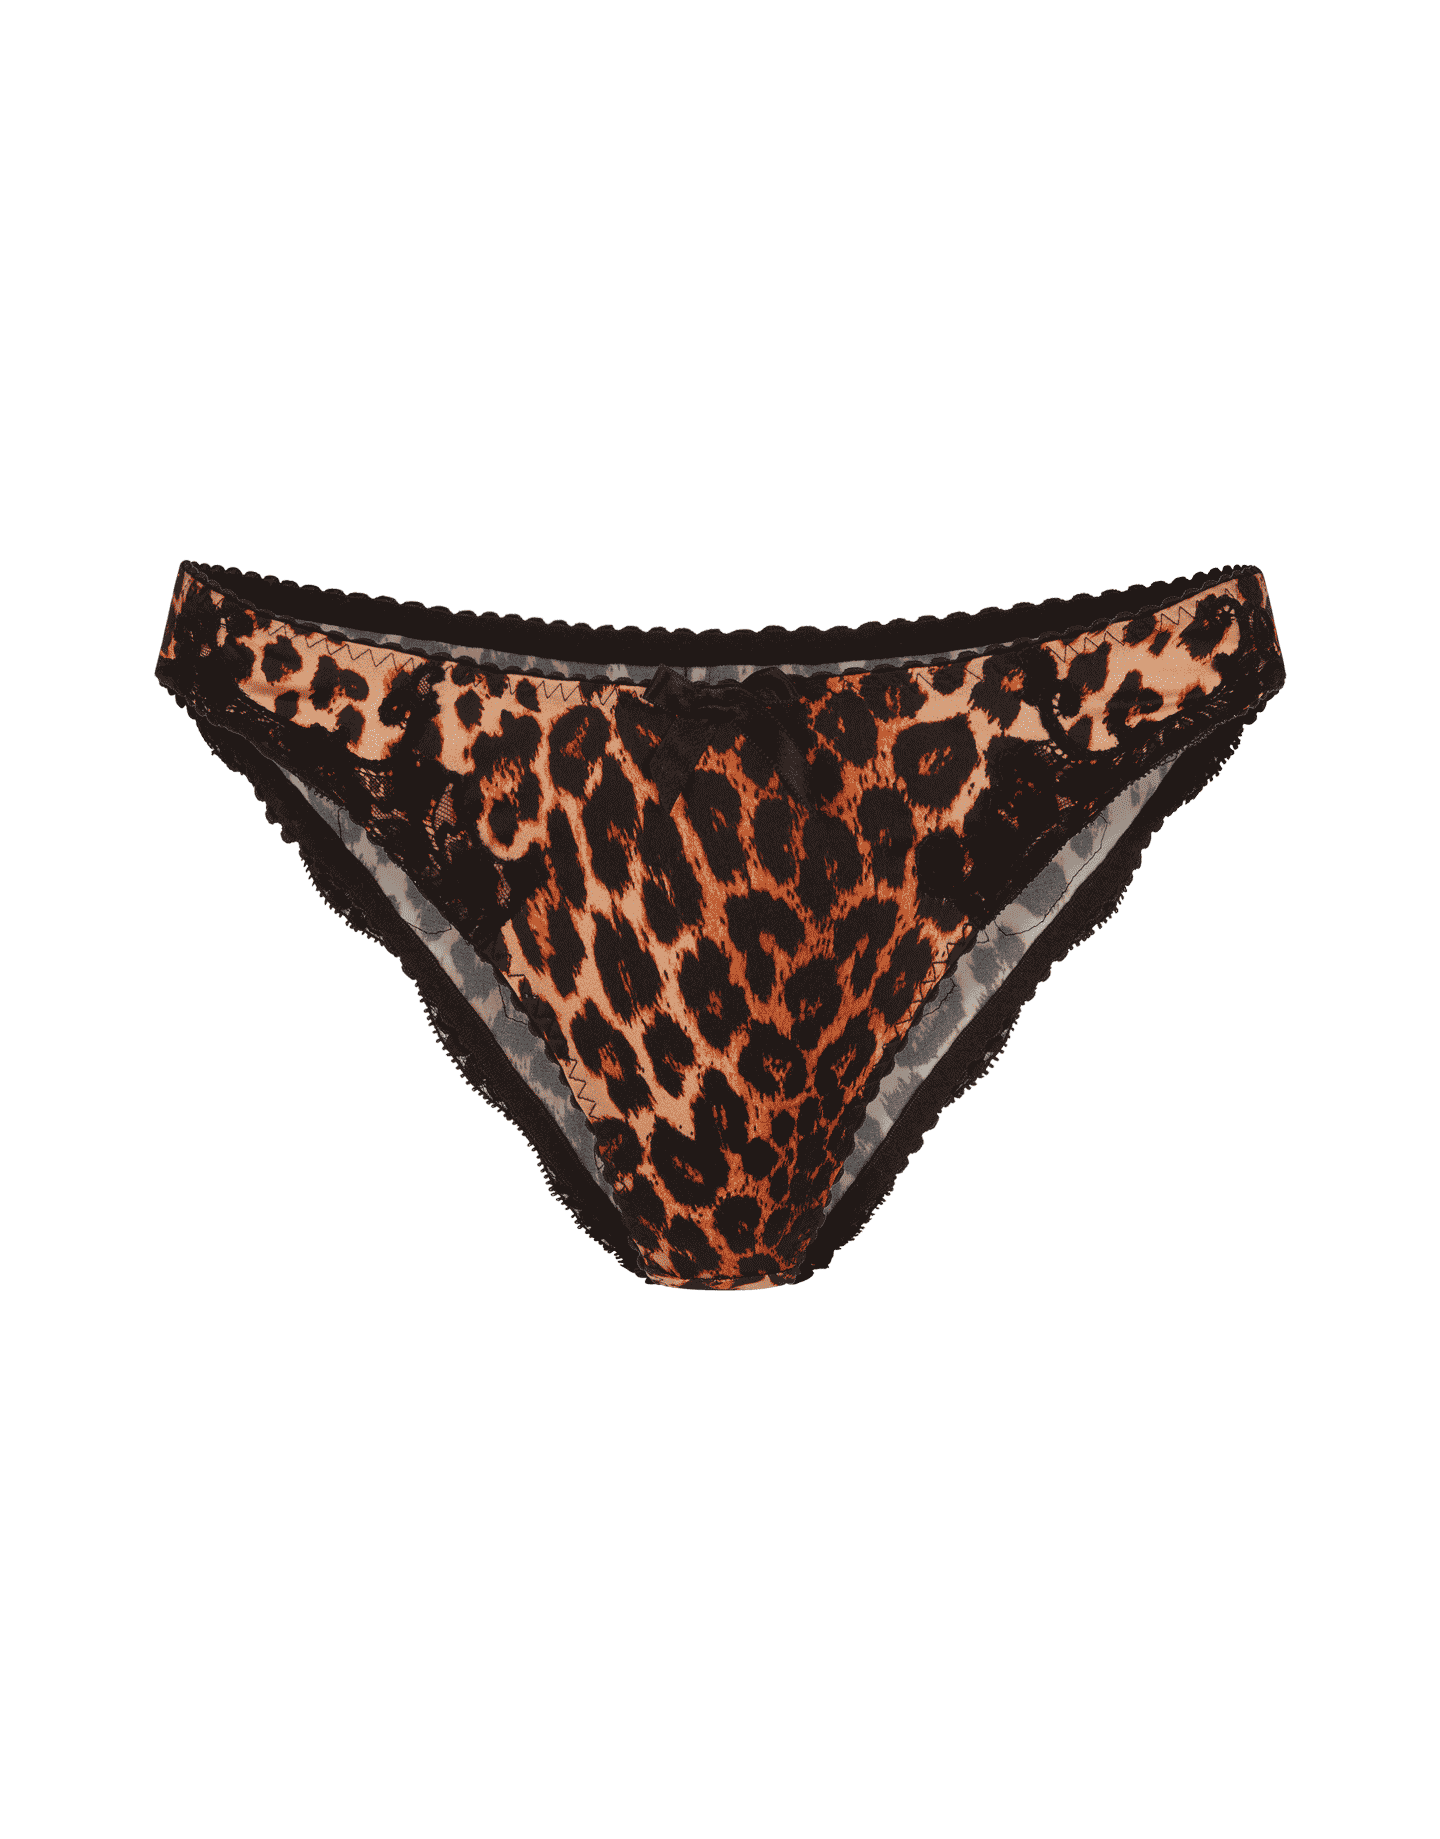 Molly Full Brief in Leopard  Agent Provocateur All Lingerie